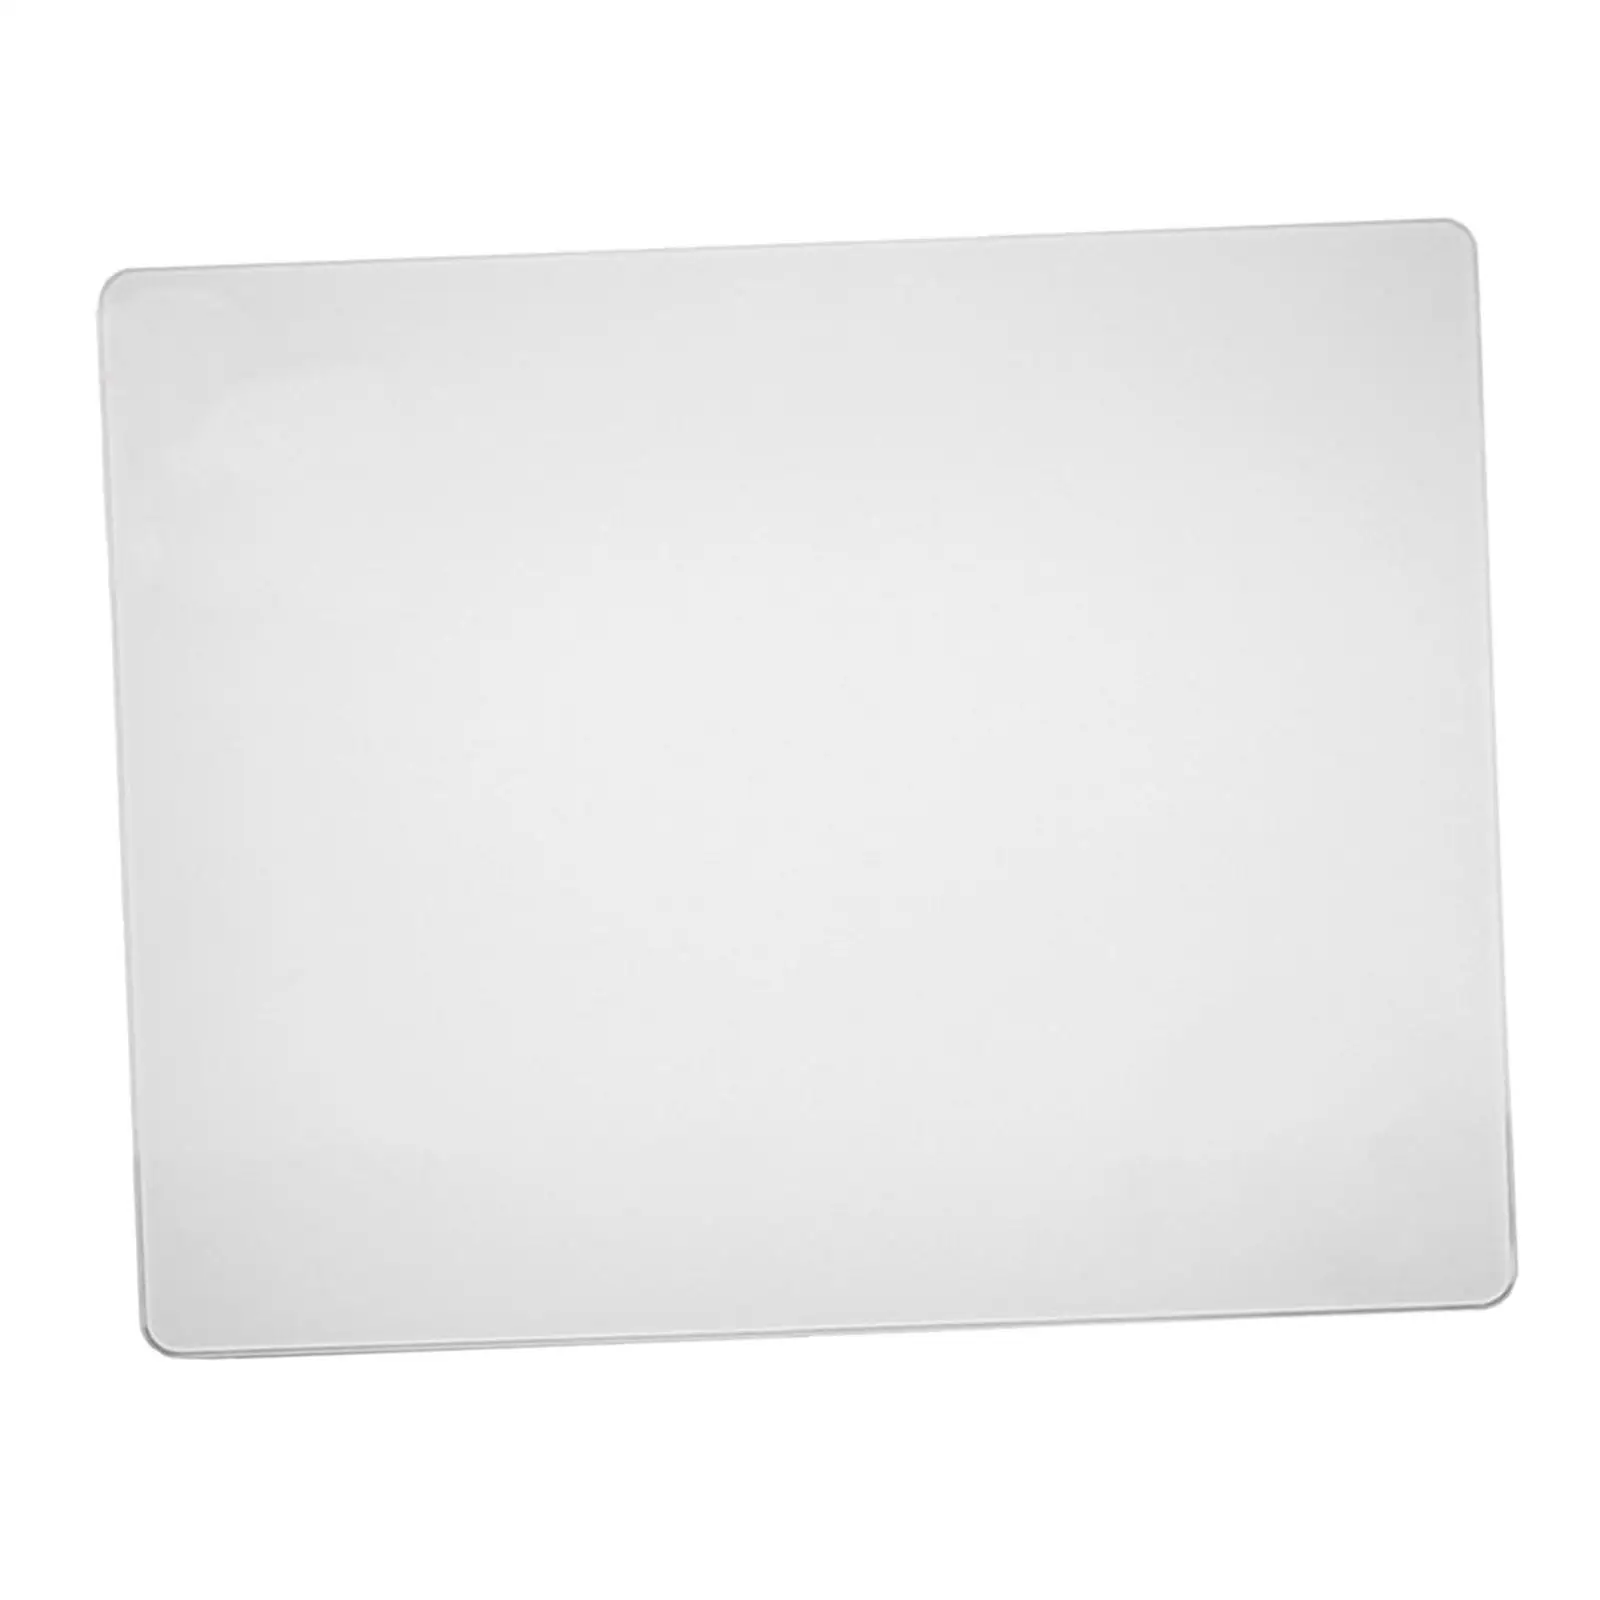 Glass Mouse Pad High Precision and Speed Hard Professional Waterproof Clear Smooth Mouse Mat for Computer Laptop PC Office